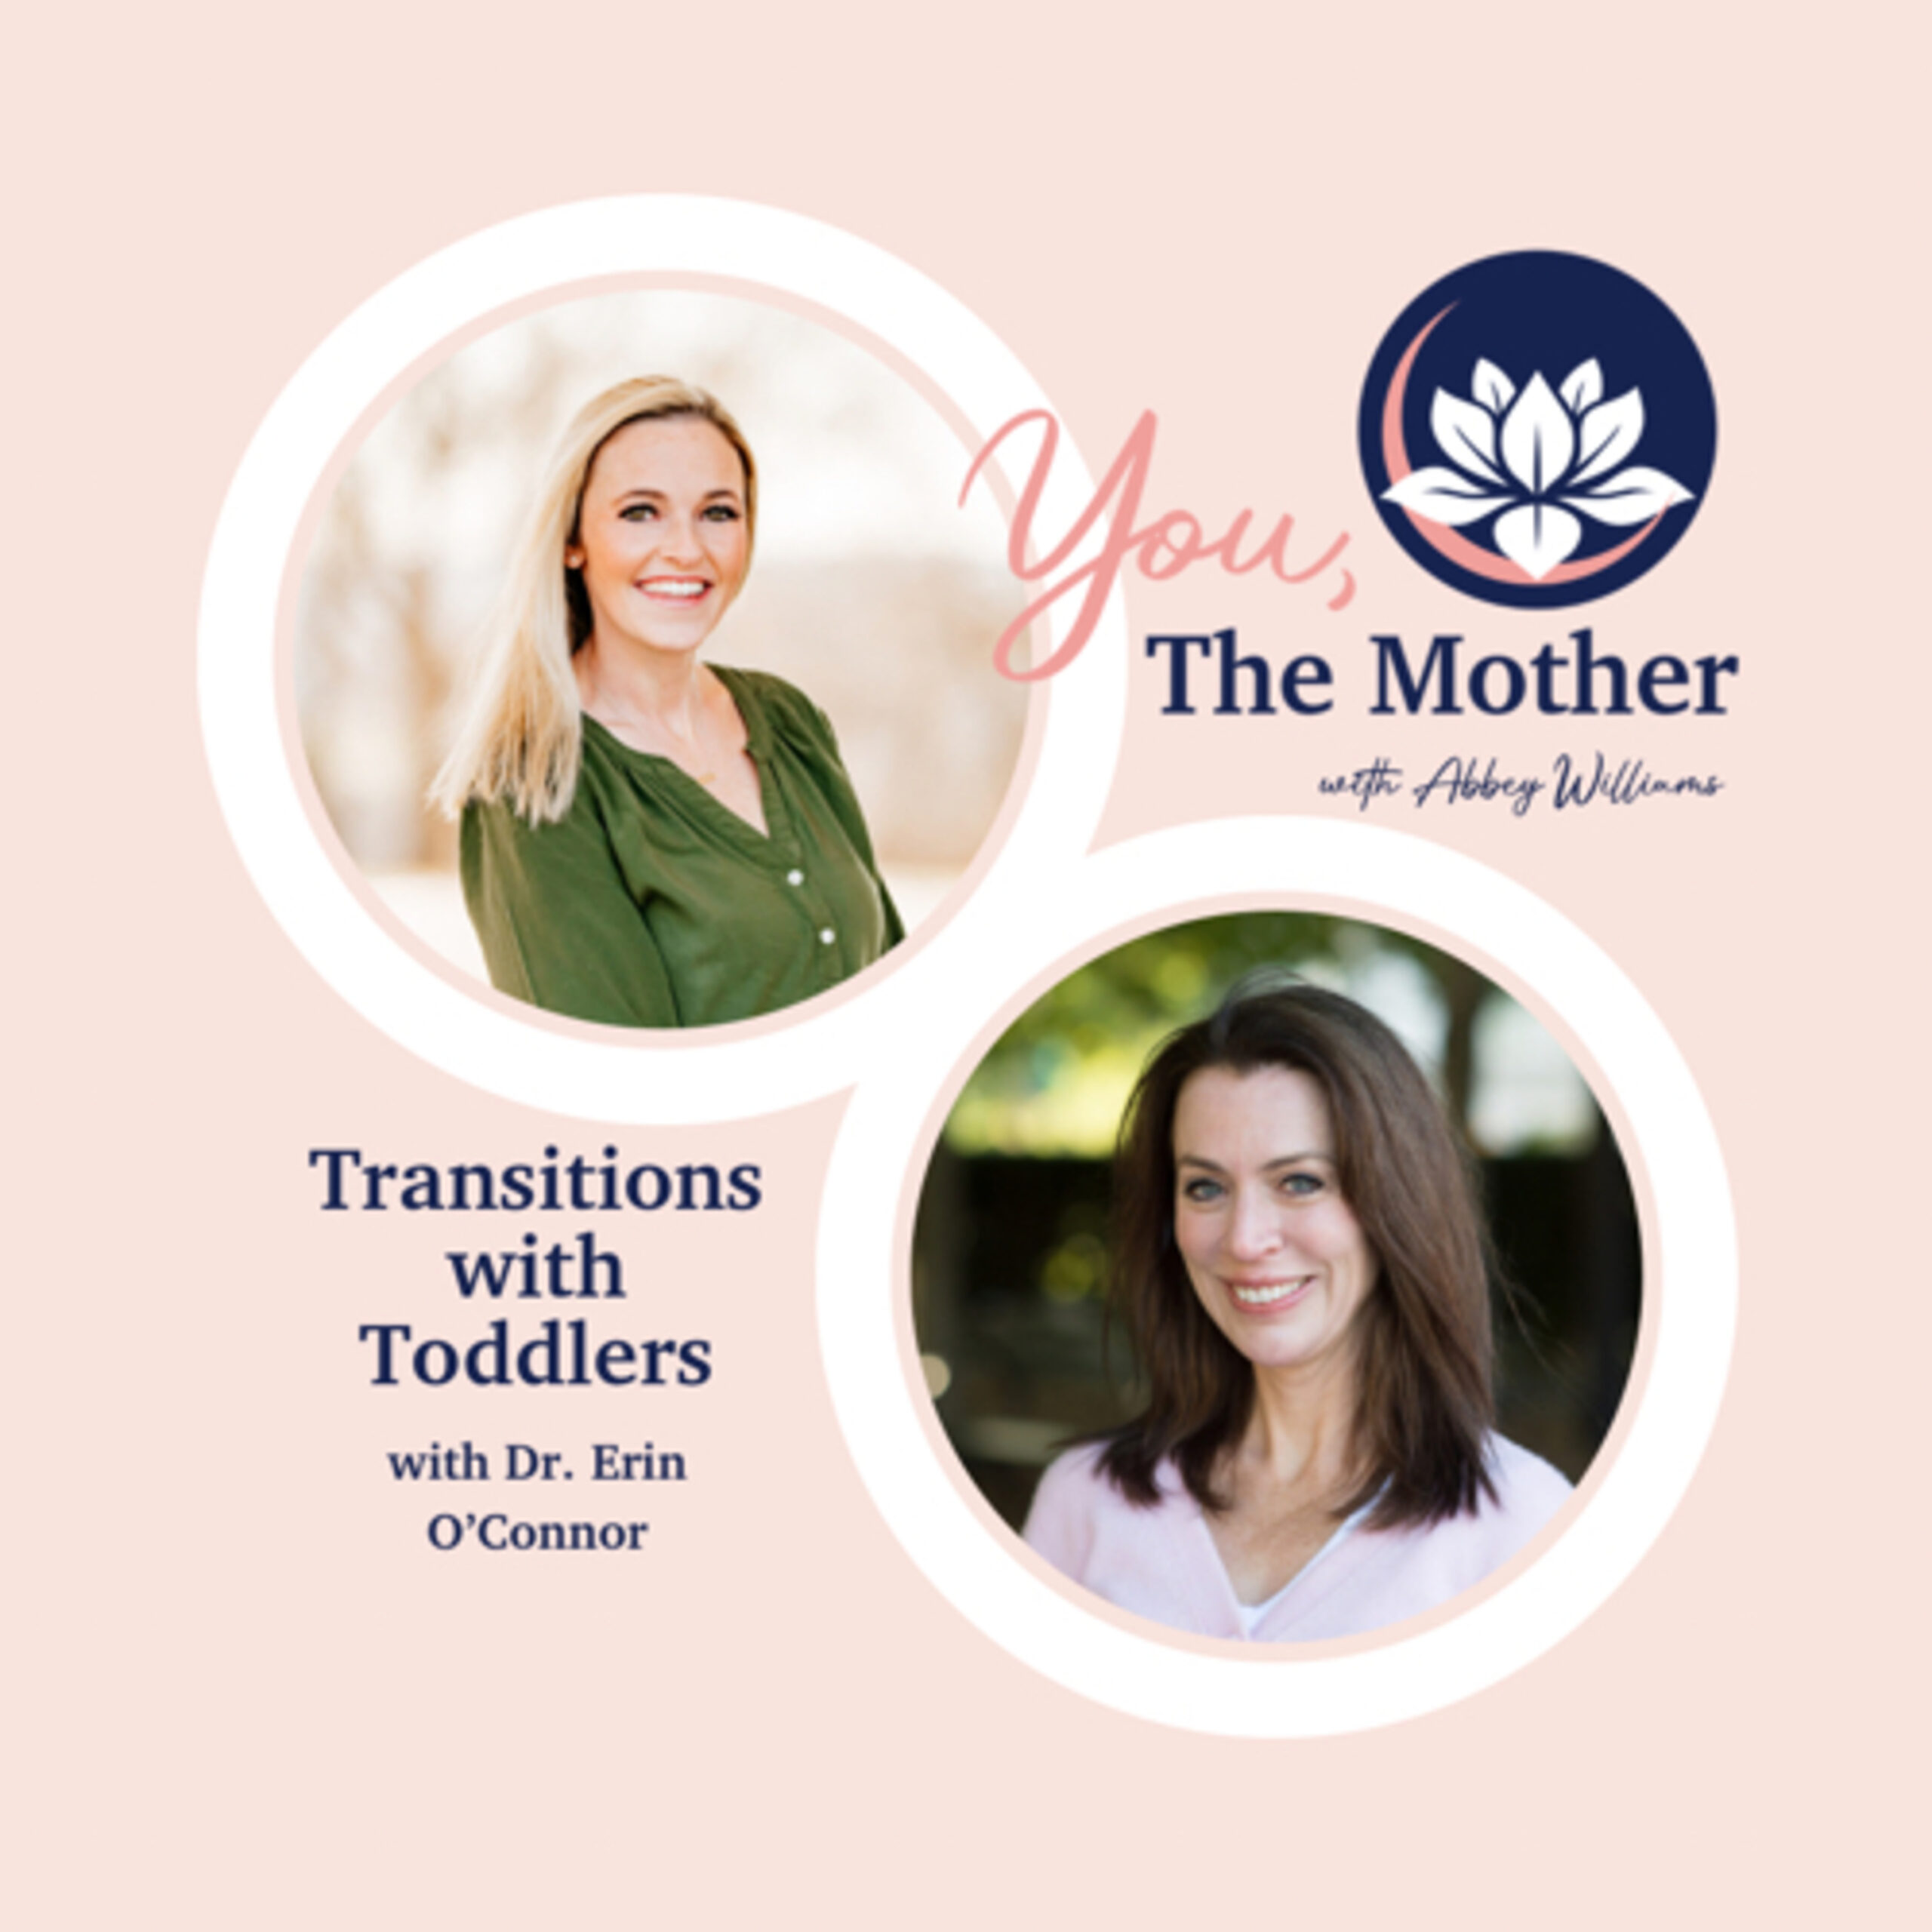 Transitions with Toddlers with Dr. Erin O’Connor